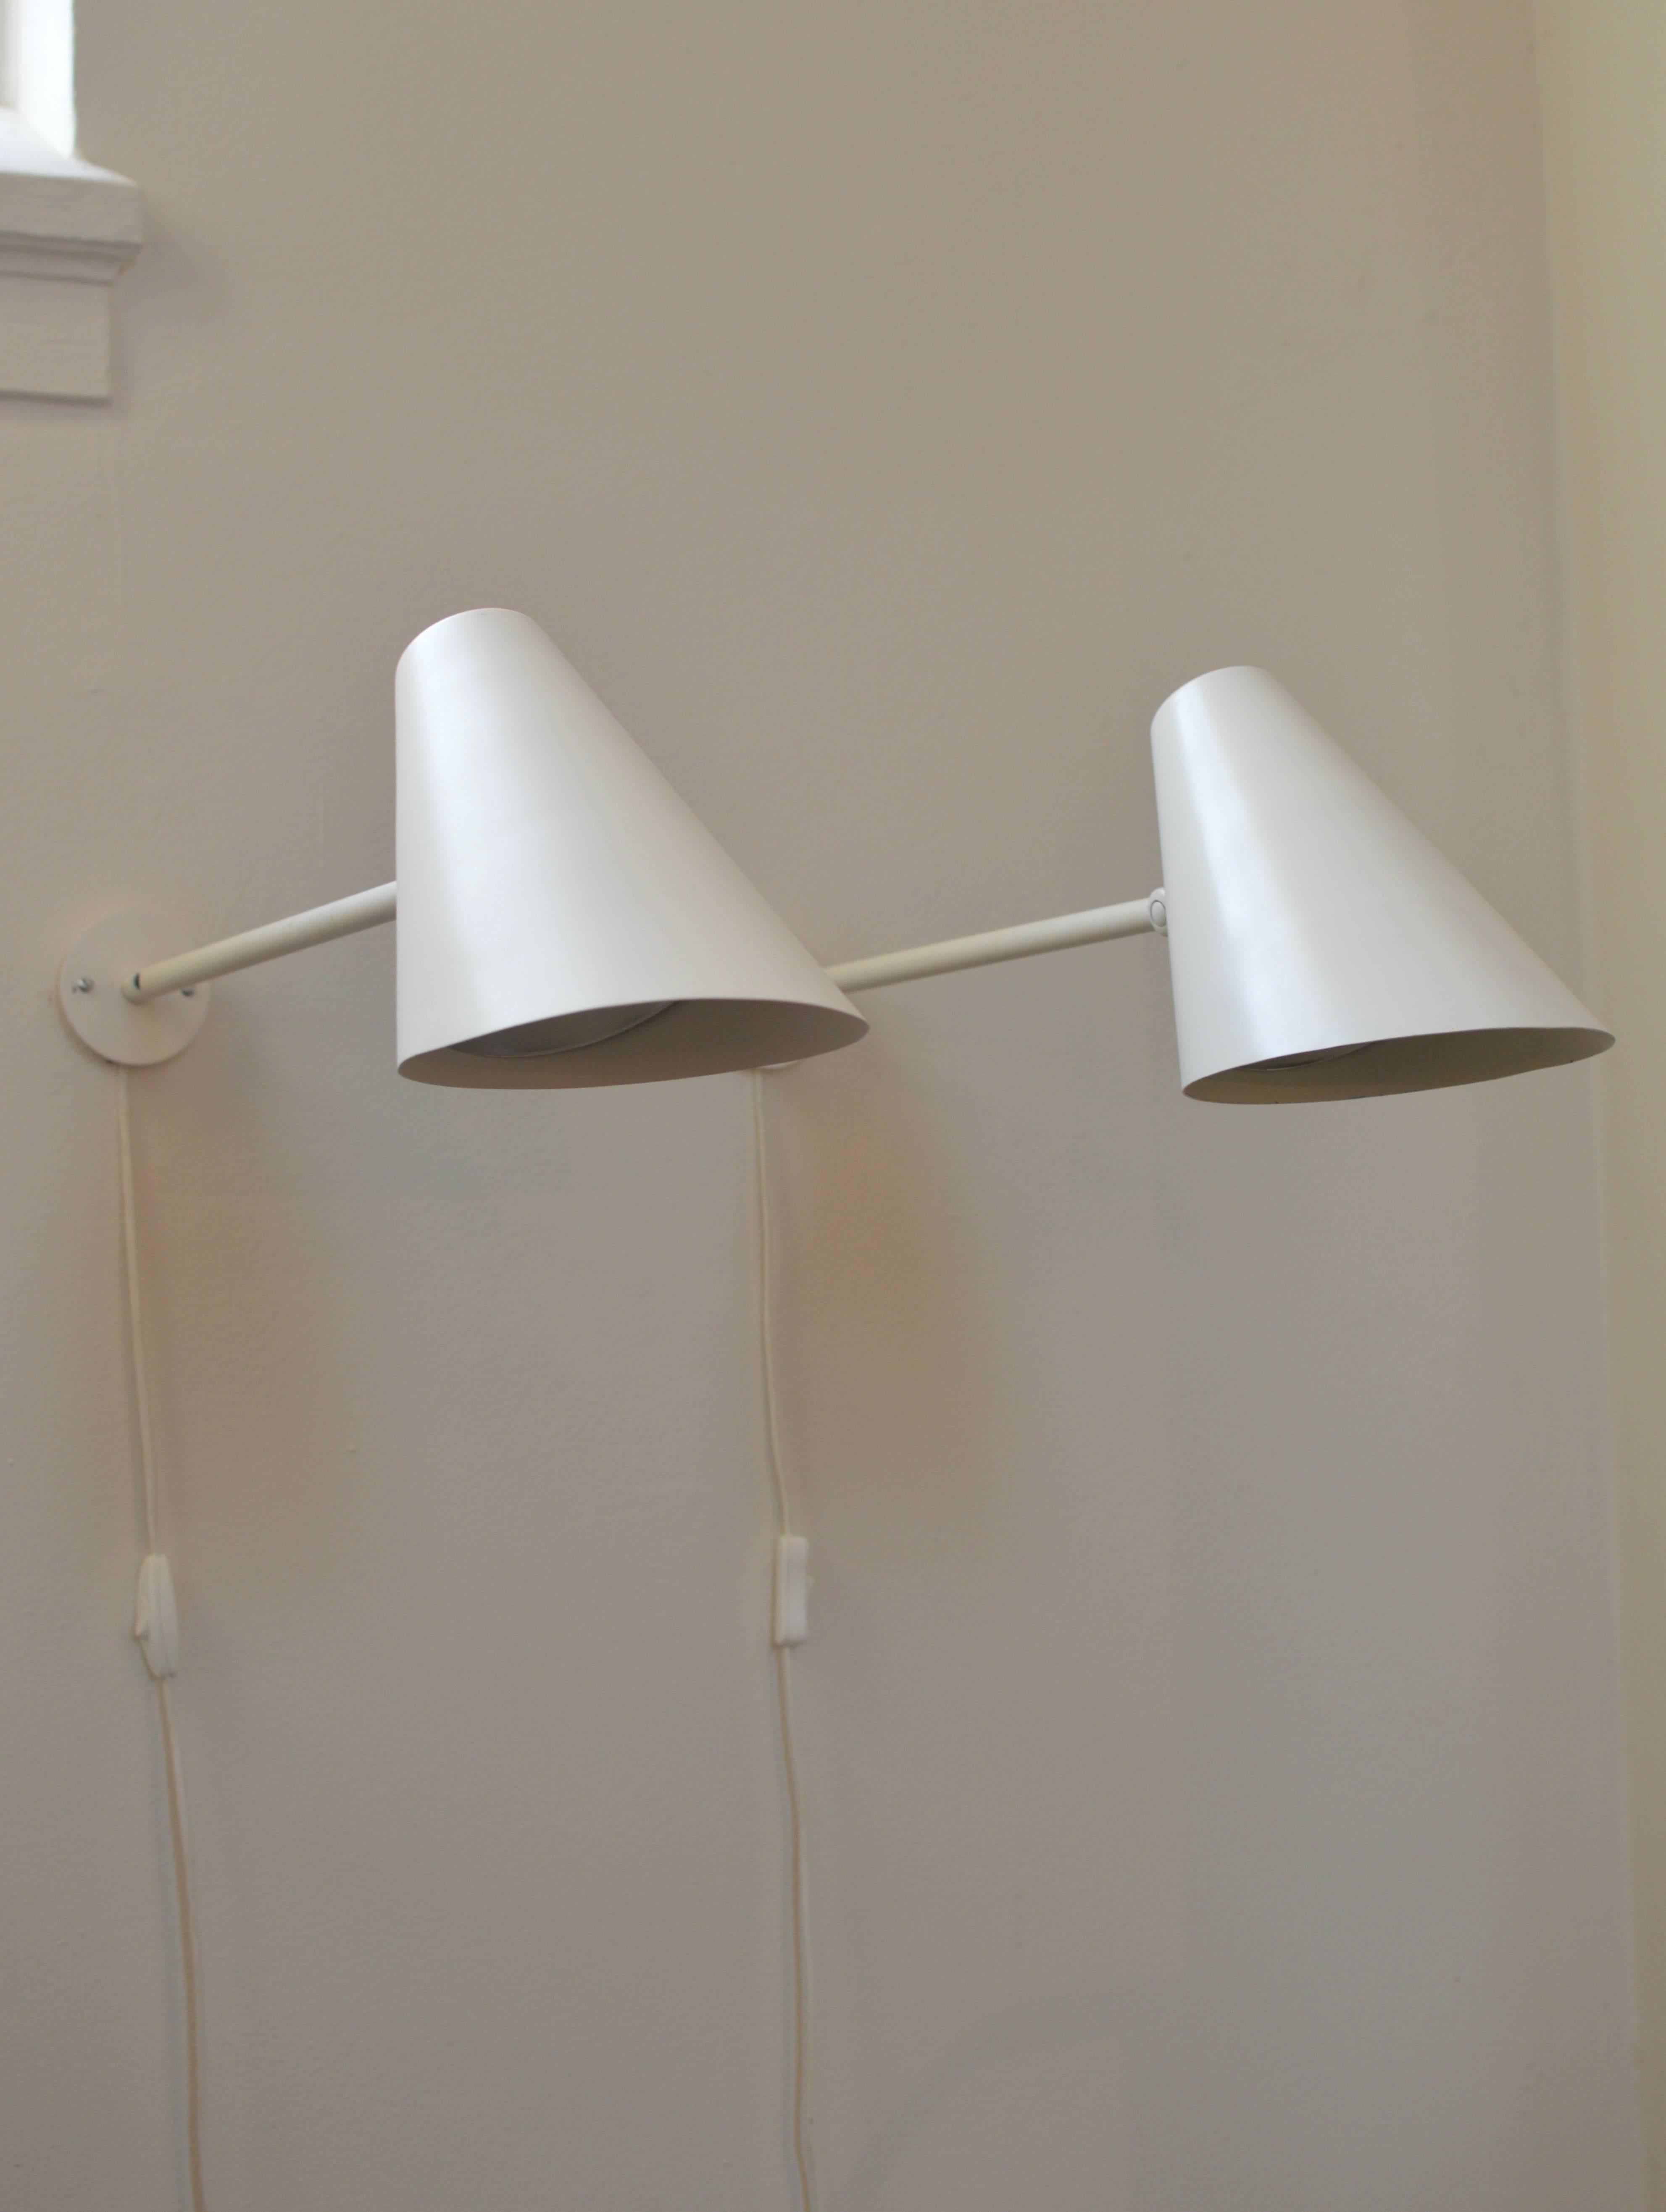 Rare large white wall lamps attributed to Vilhelm Lauritzen with interior reflector's executed by Louis Poulsen. 
The lamps are executed with a hinge mechanism providing to adjust the shades as desired in up or downwards position. Designed in the